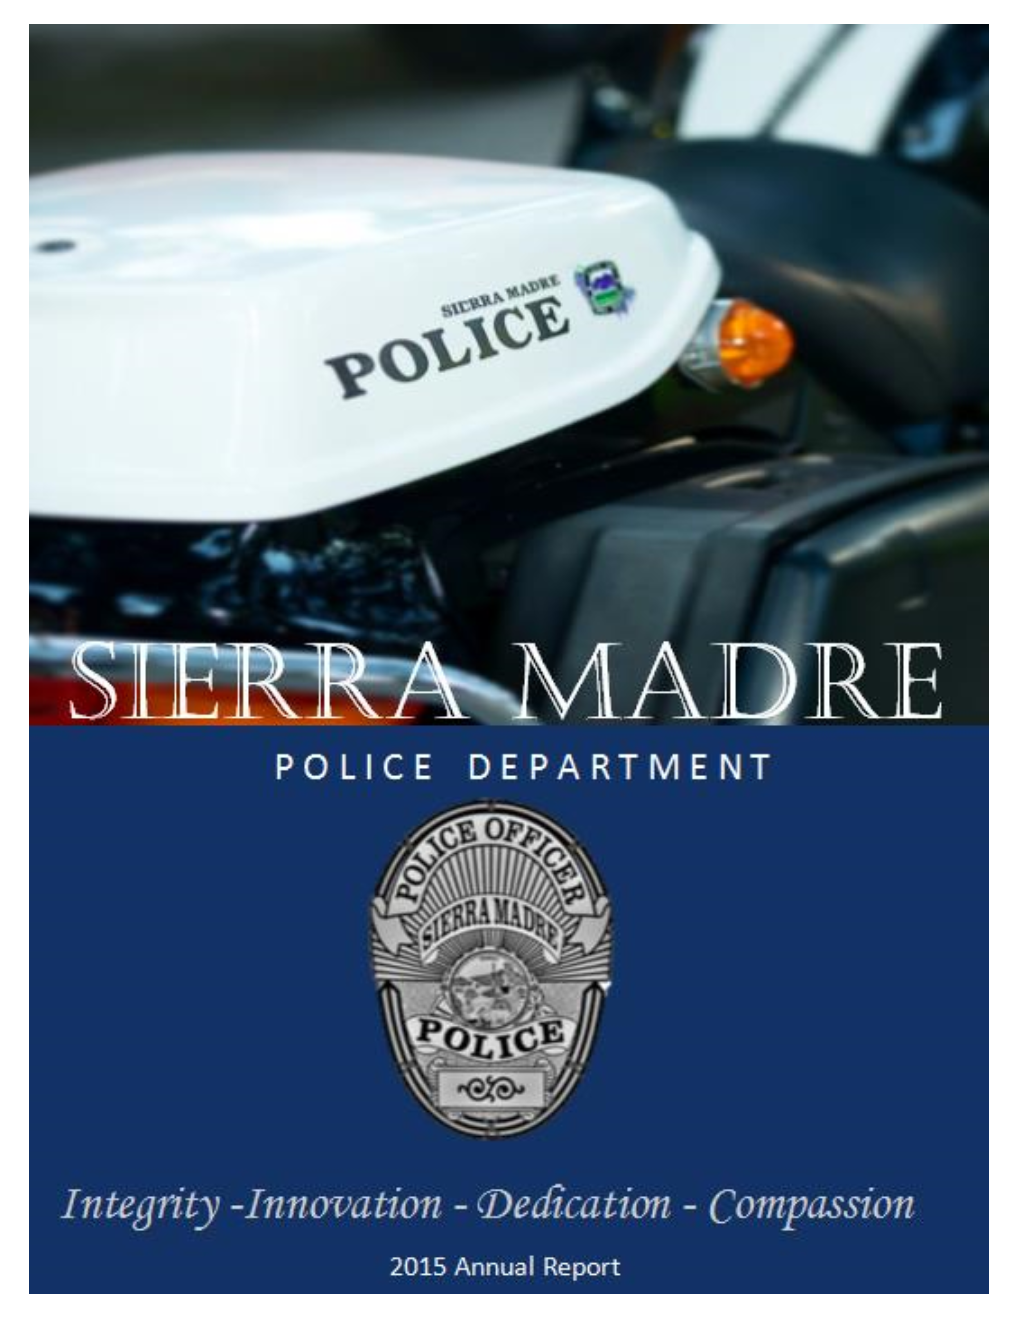 Police Department Annual Report 2015